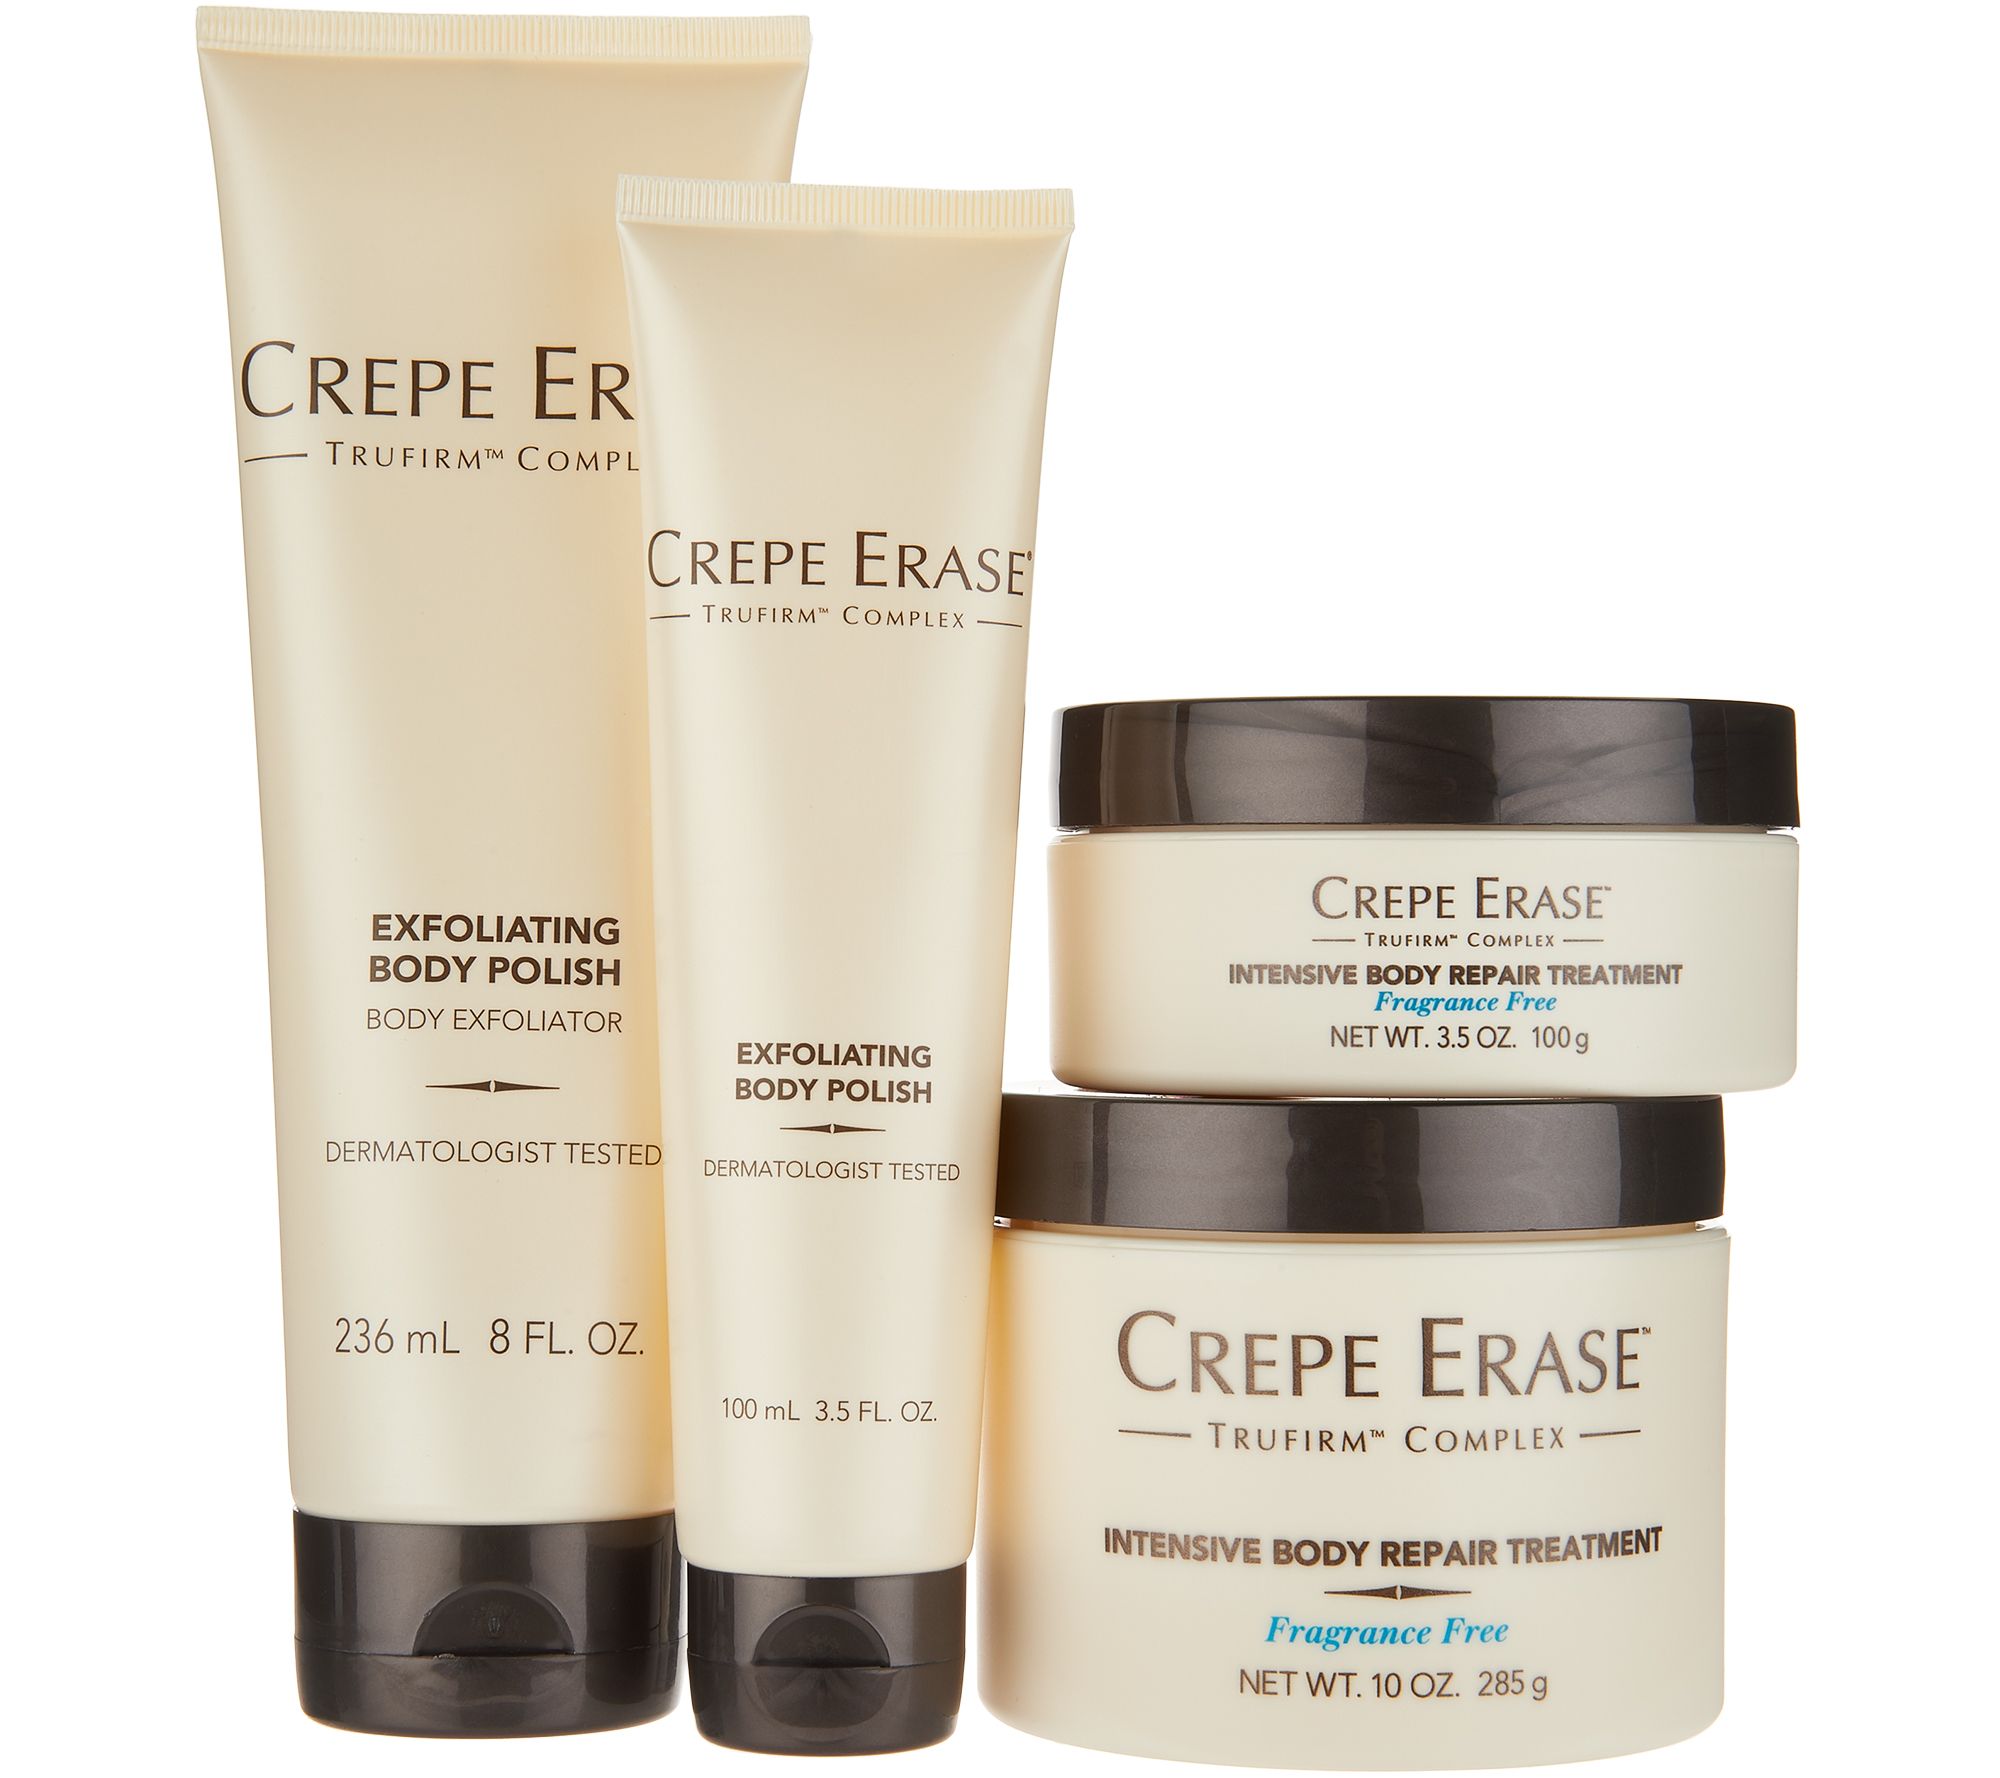 Crepe Erase Review - The Dermatology Review